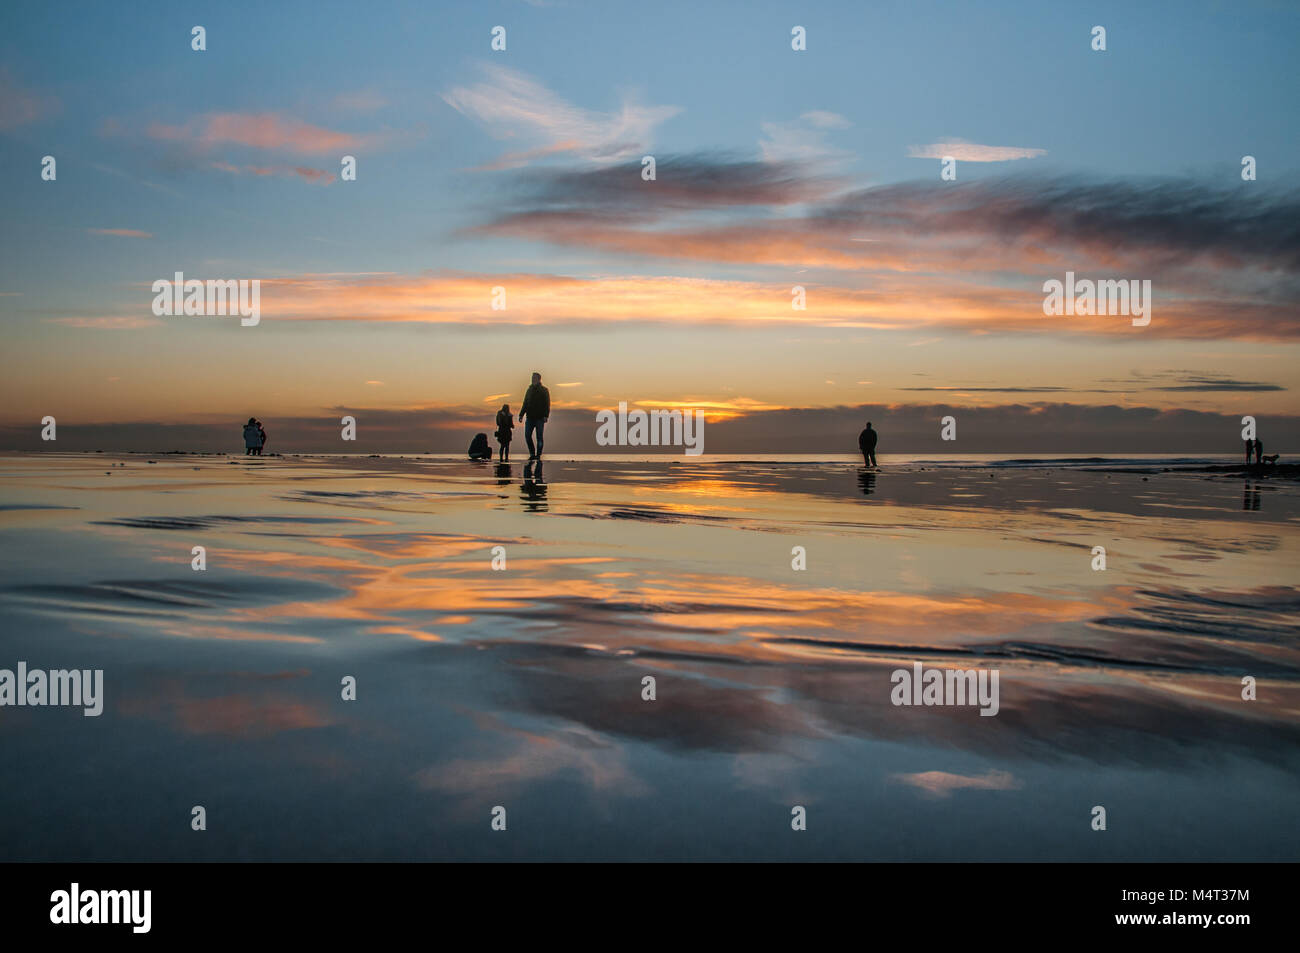 Birling Gap, East Sussex, UK . 17 February 2018..Sunset behind clouds creates spectacular colors  over the wet sand after another glorious Spring like day on the South Coast of England.. David Burr/Alamy Live News Stock Photo